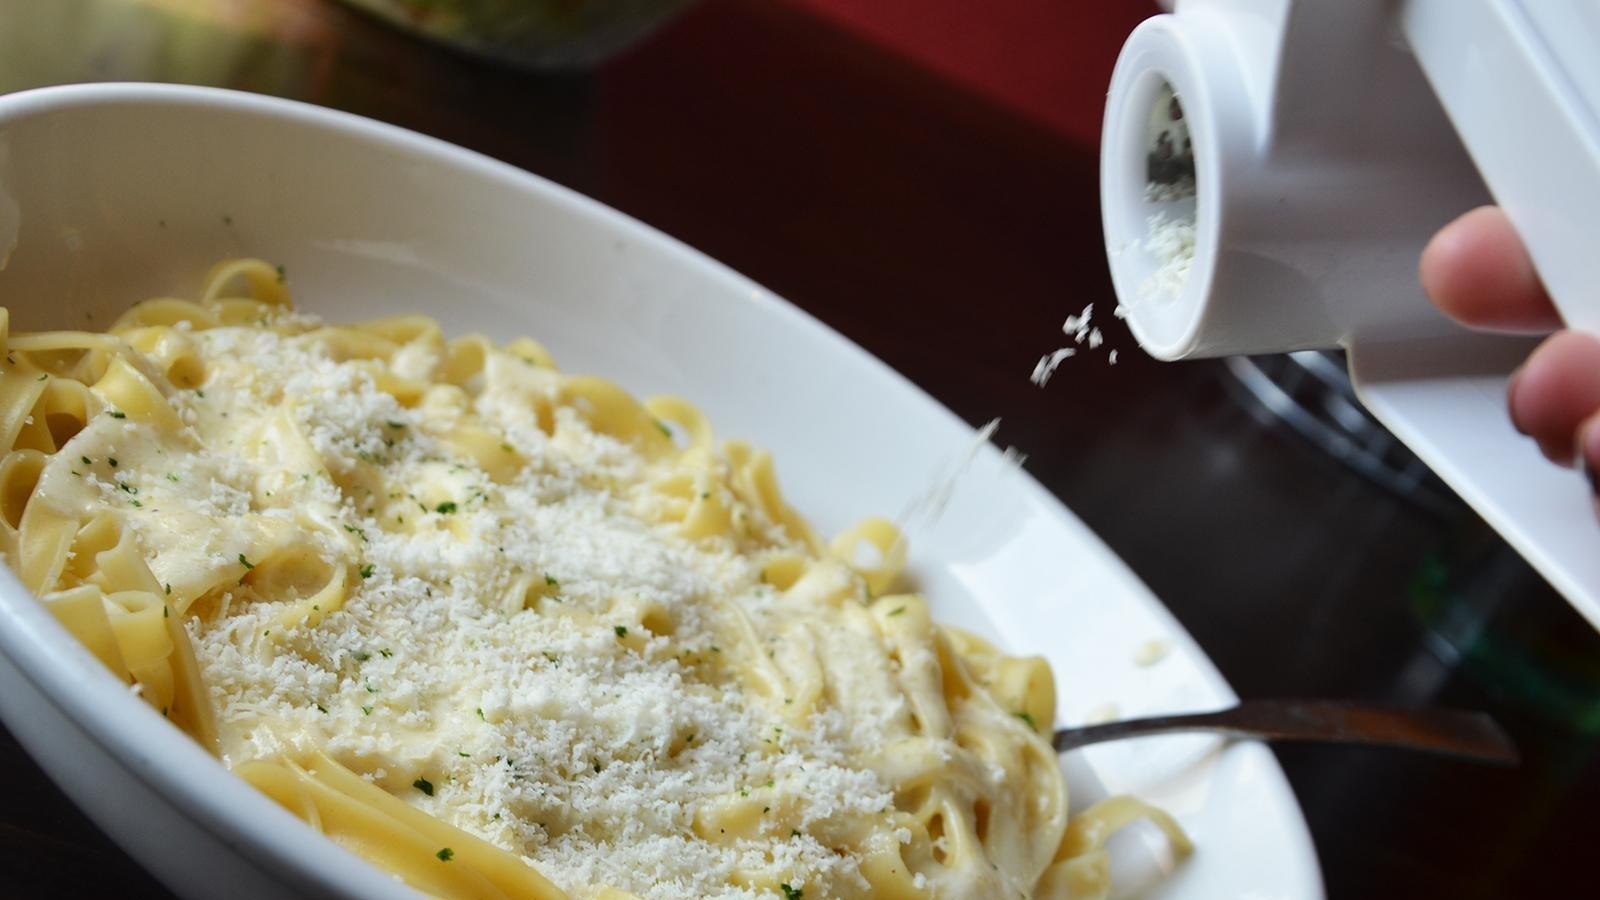 https://www.thedailymeal.com/img/gallery/the-cheese-olive-garden-grates-on-pasta-may-not-be-true-parmesan/l-intro-1690310920.jpg